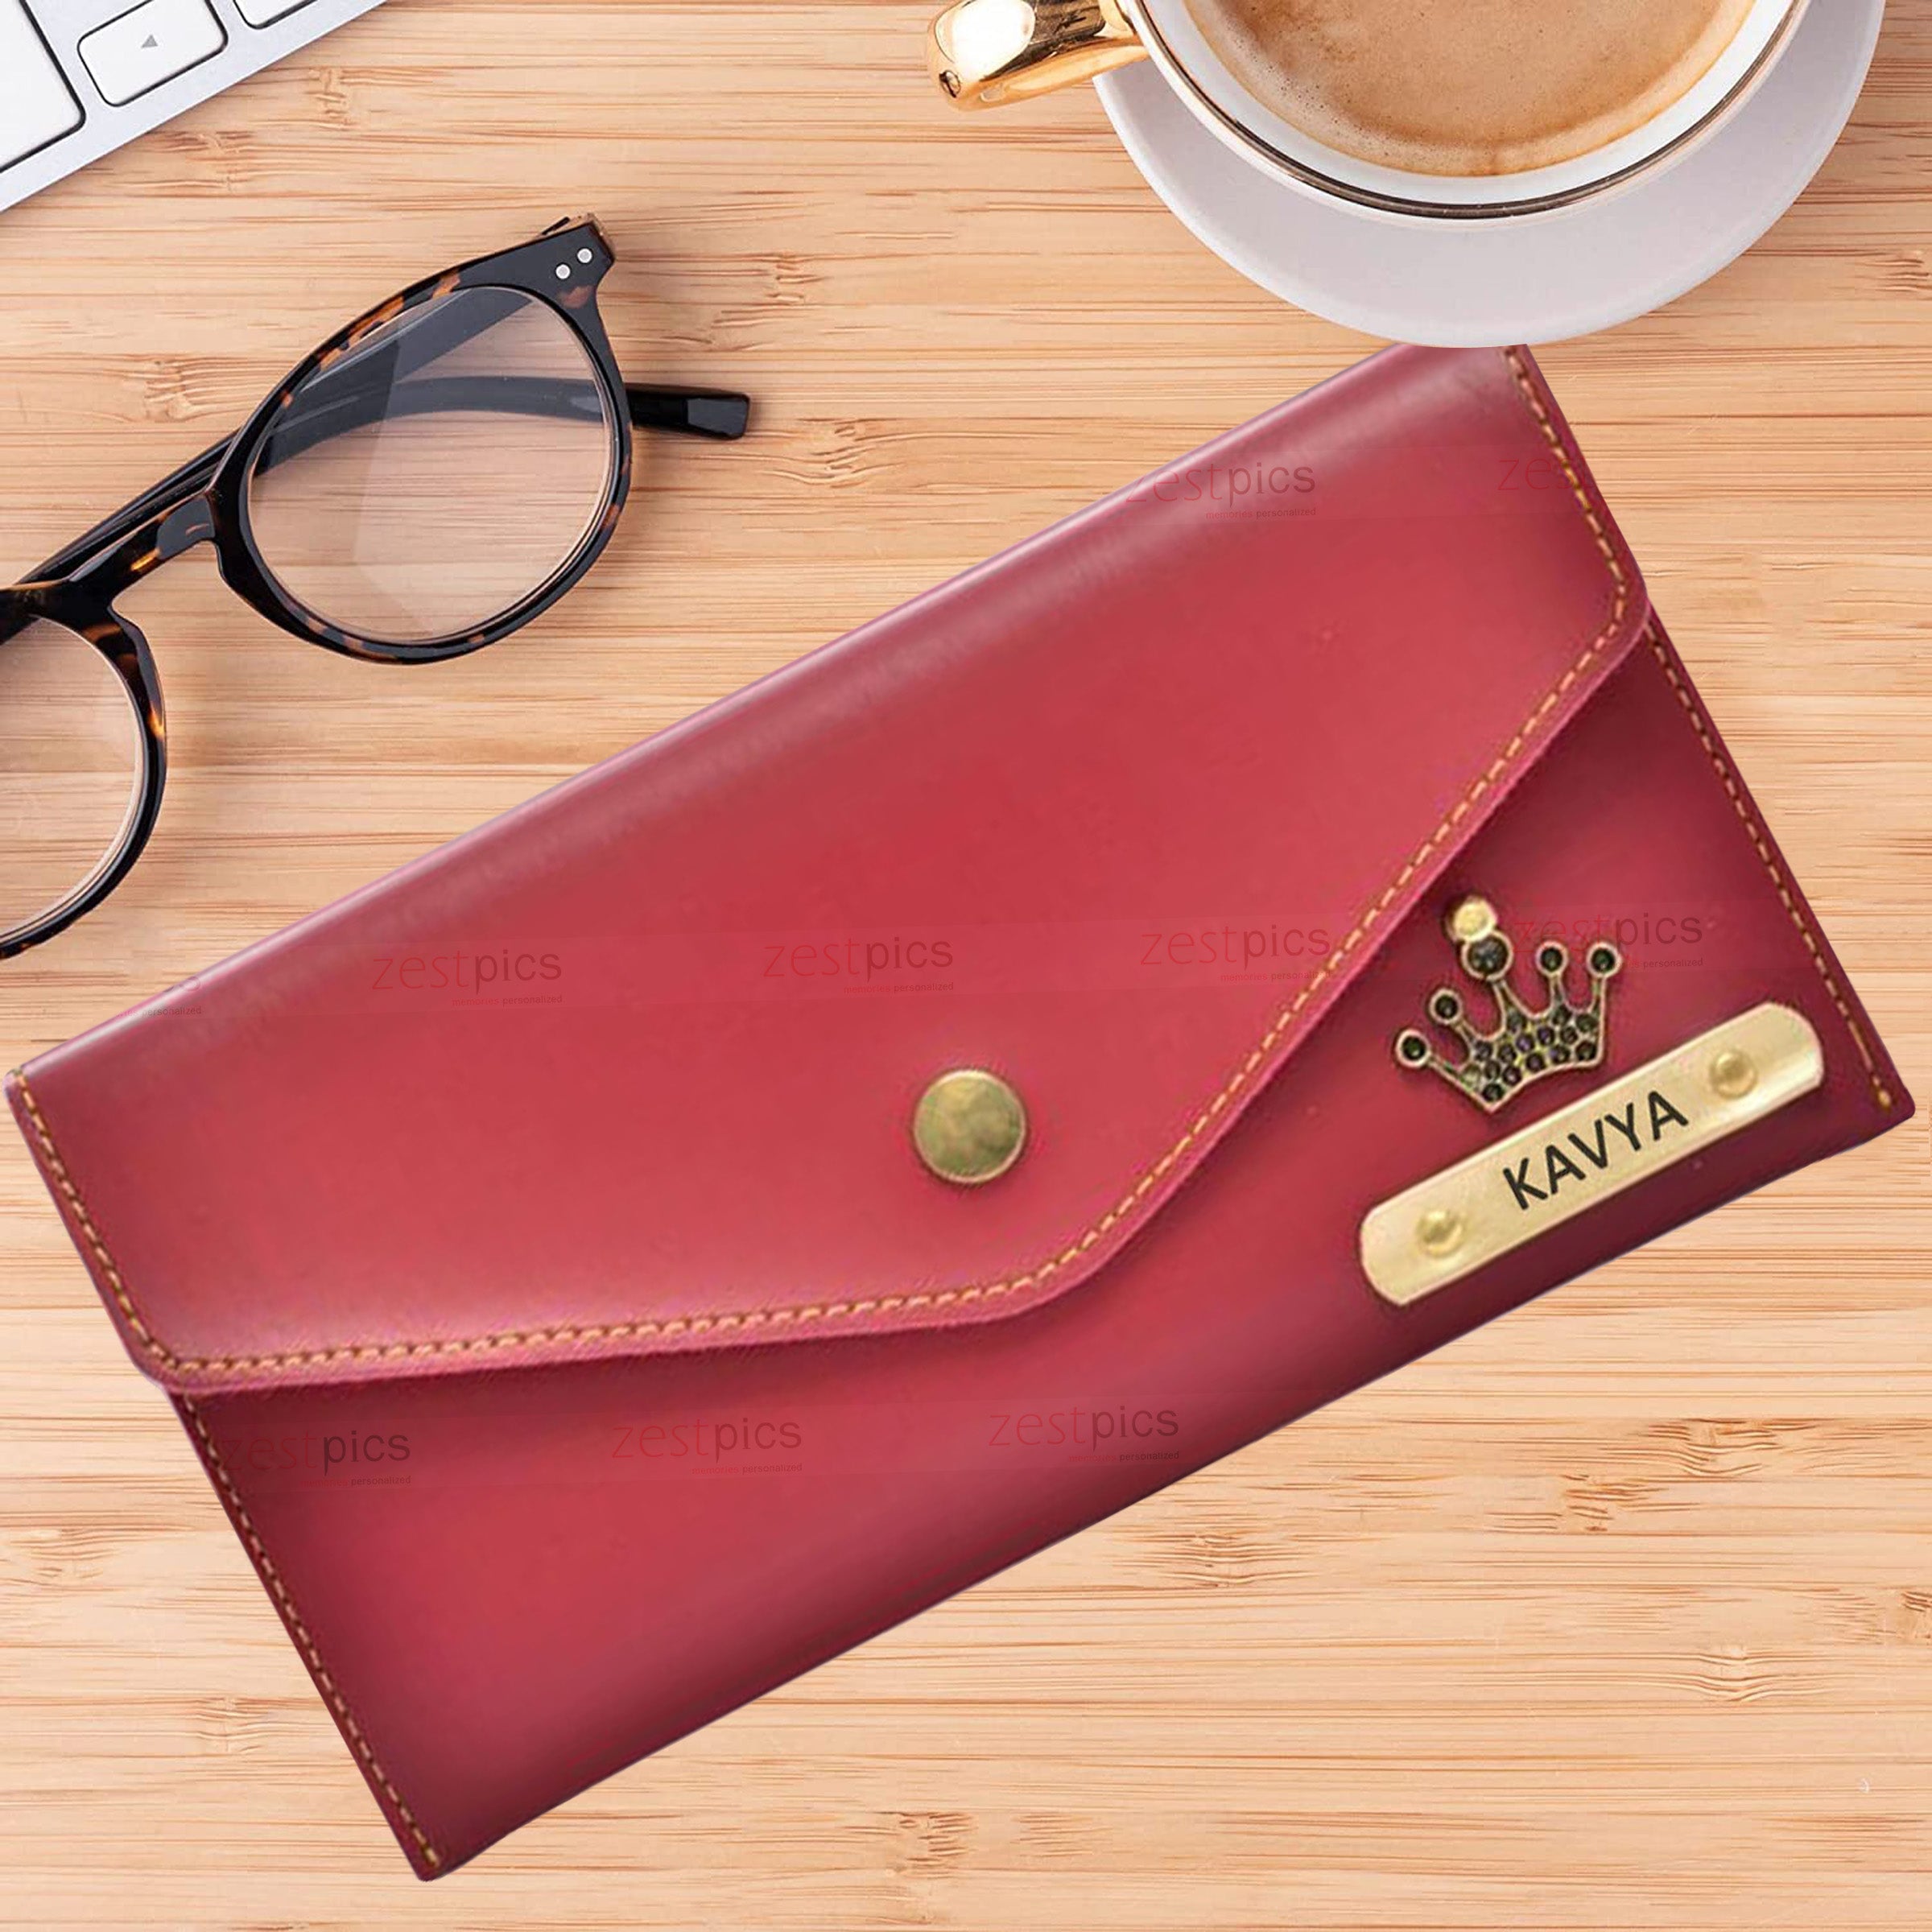 Personalized Add Your Name on Leather Purse Tote - Etsy